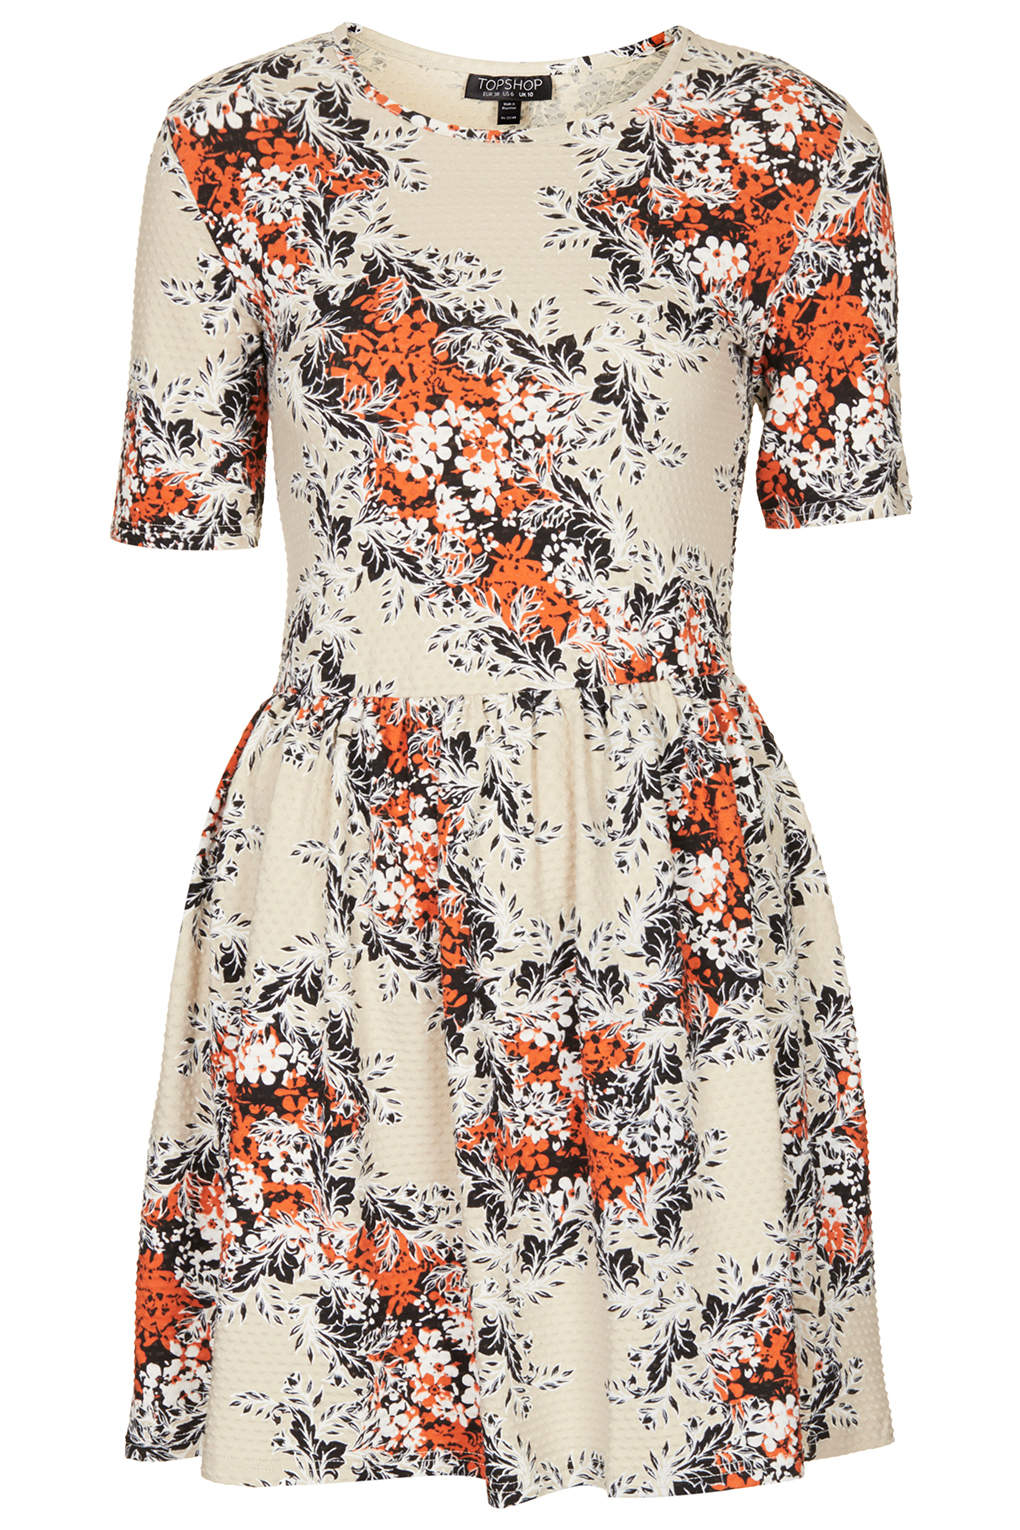 Topshop Floral Texture Flippy Dress in Multicolor (STONE) | Lyst